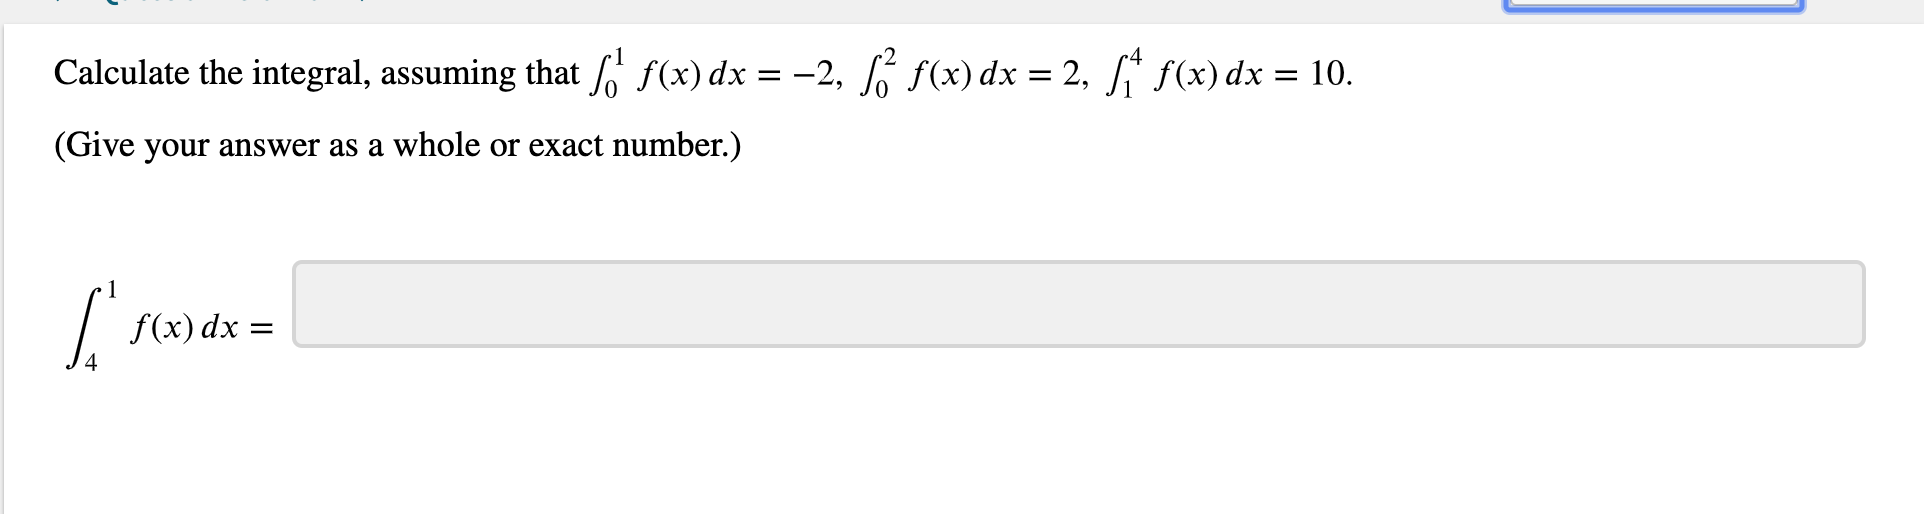 f(x) dx 2, f(x)dx 10.
Calculate the integral, assuming that
f(x)dx=
-2,
(Give your answer as a whole or exact number.)
f(x) dx
